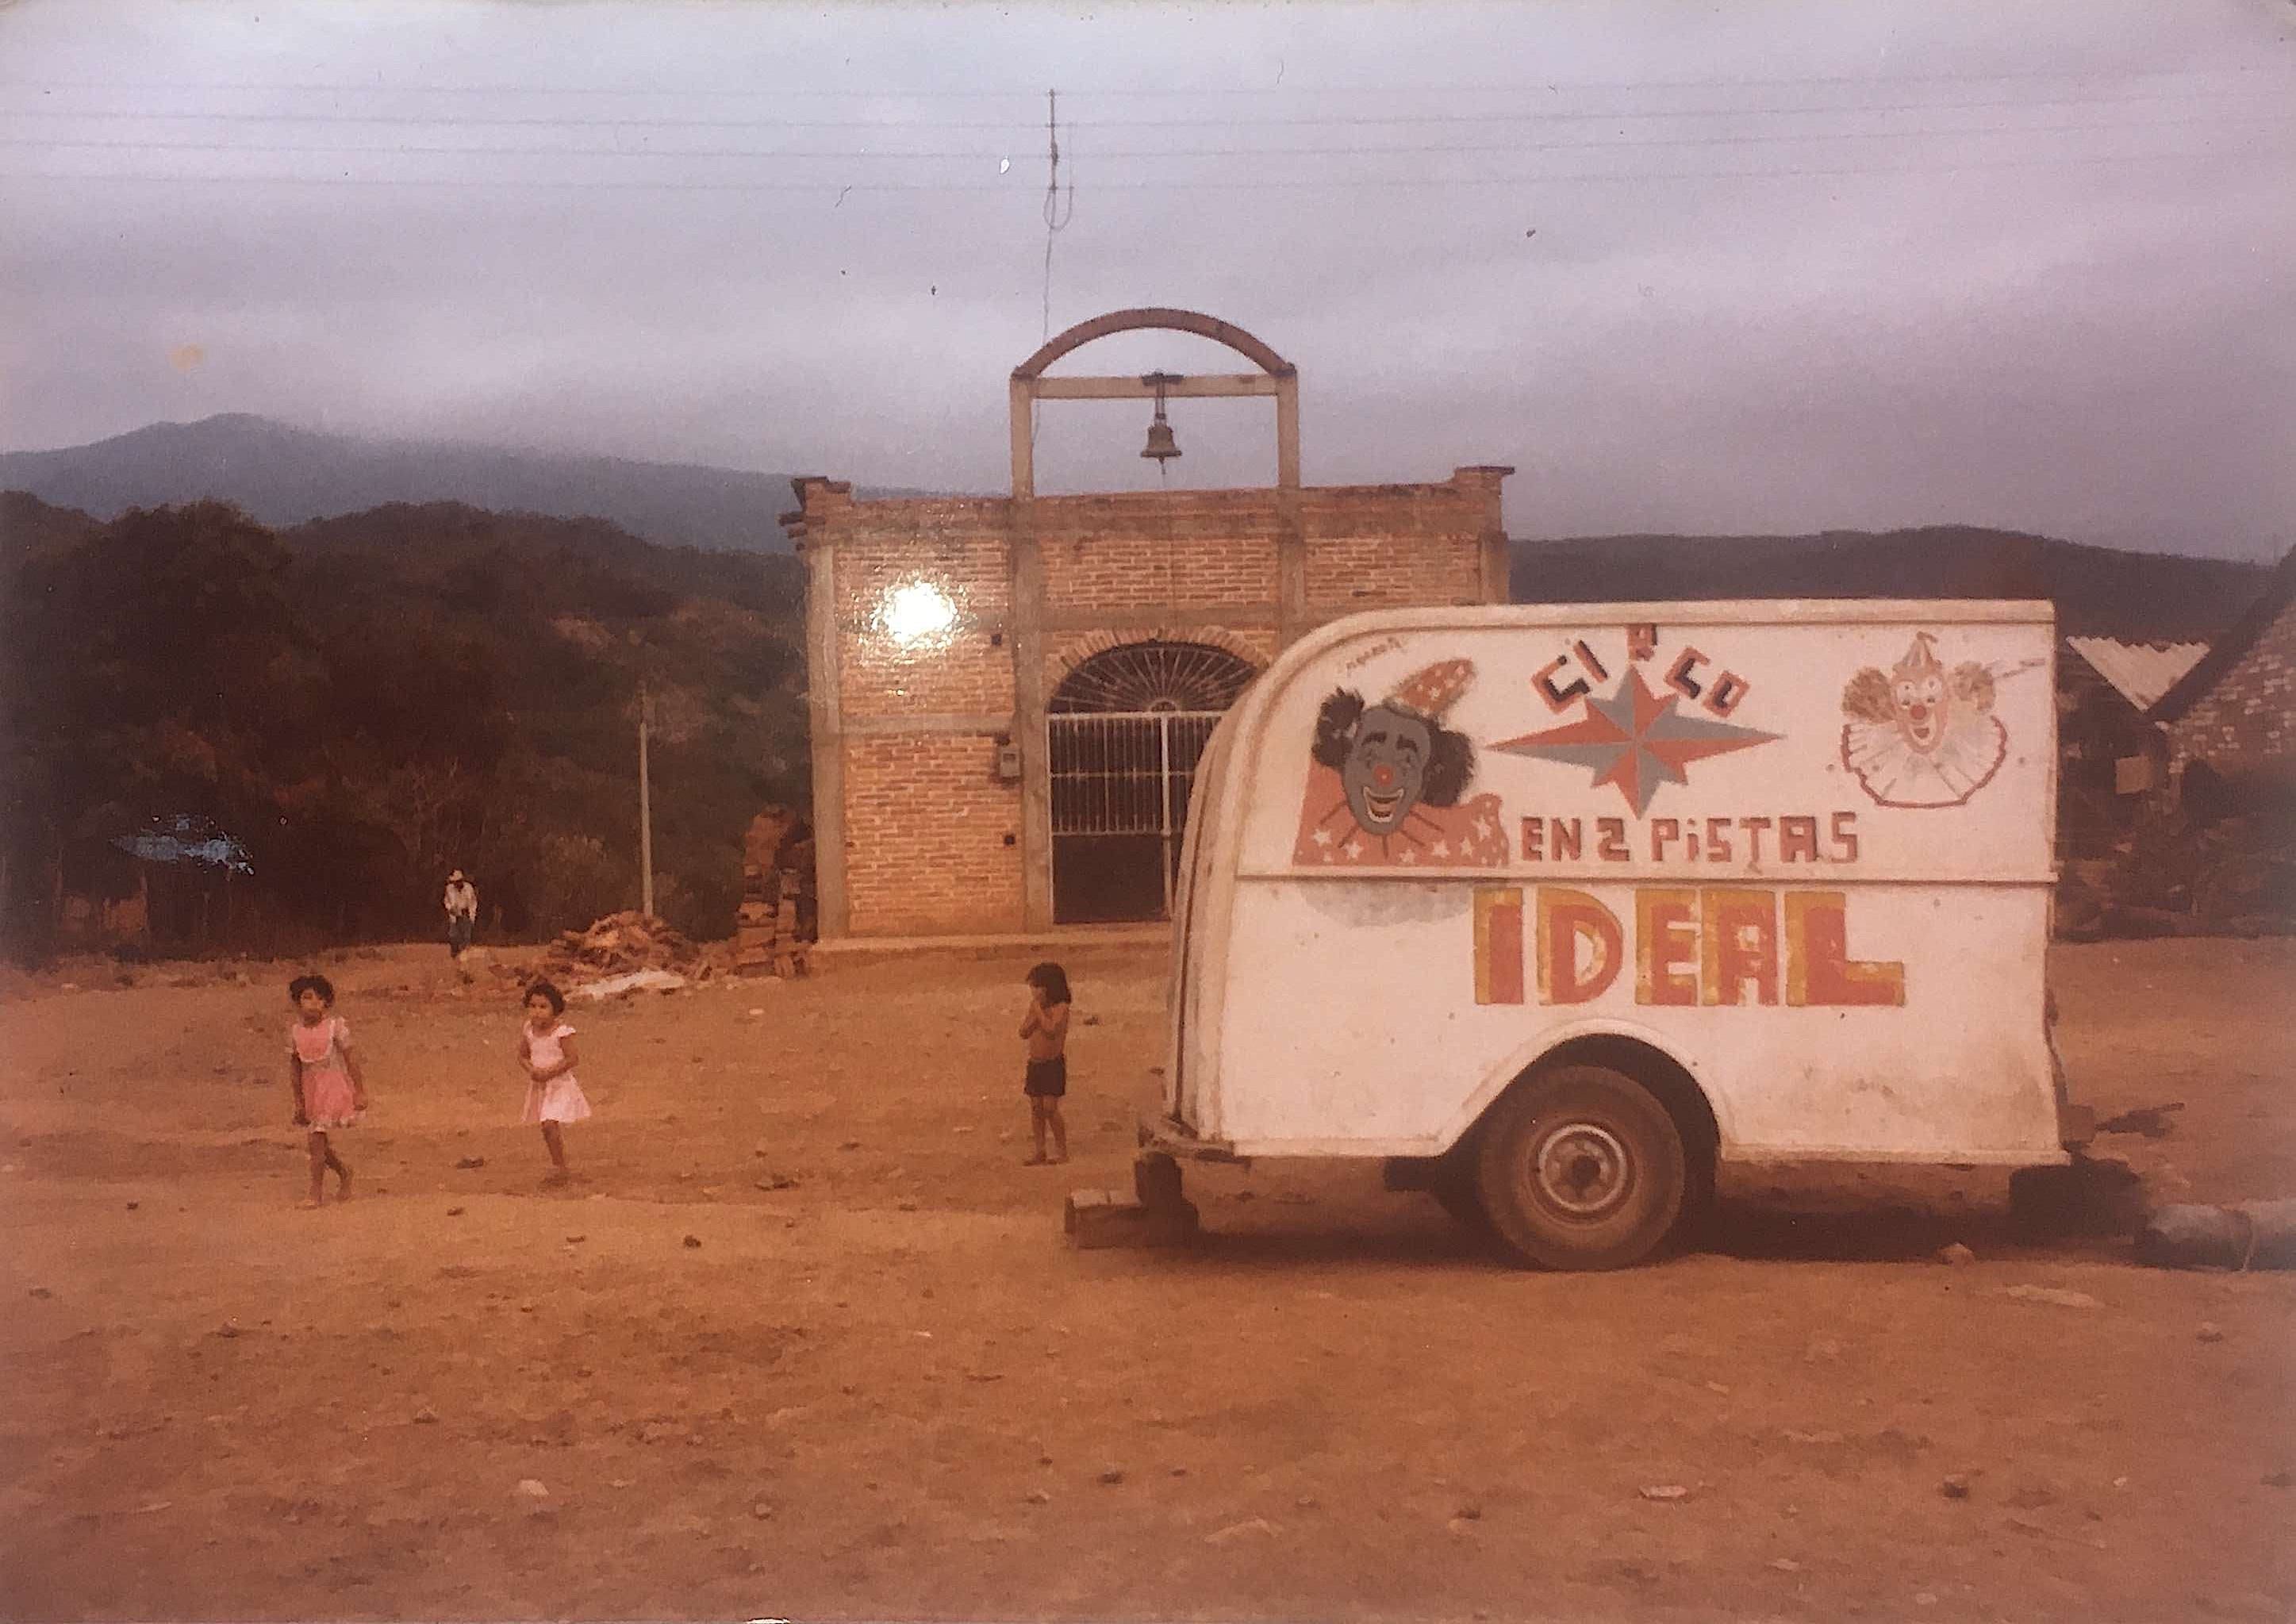 Our Azteca Circus camped on flat patch of land where we set up the Carpa (tent) in a pueblito (small village)  Jalisco Mexico 1979. (Where I worked as a clown and fire eater-Fakir (desde Londres Inglaterra) This was also grandma Beghinnia’s ticket office.